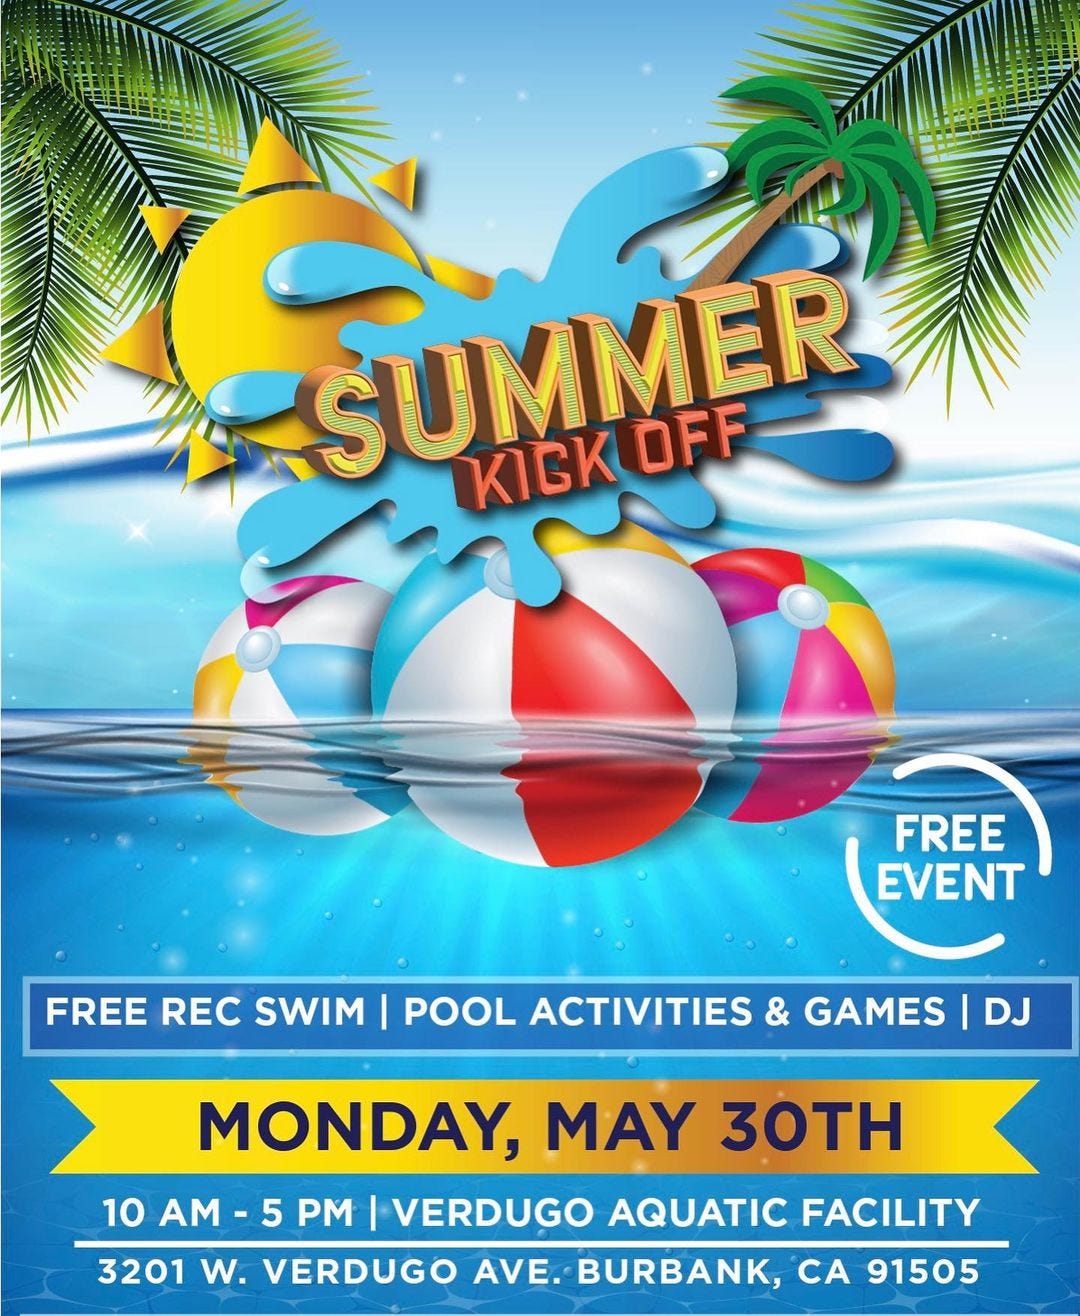 May be an image of body of water and text that says 'KICK SUMMER OFF FREE REC SWIM FREE EVENT POOL ACTIVITIES & GAMES DJ MONDAY, MAY 30TH 10 AM - 5 PM VERDUGO AQUATIC FACILITY 3201 W. VERDUGO VE.BURBANK, BURBANK, CA 91505'